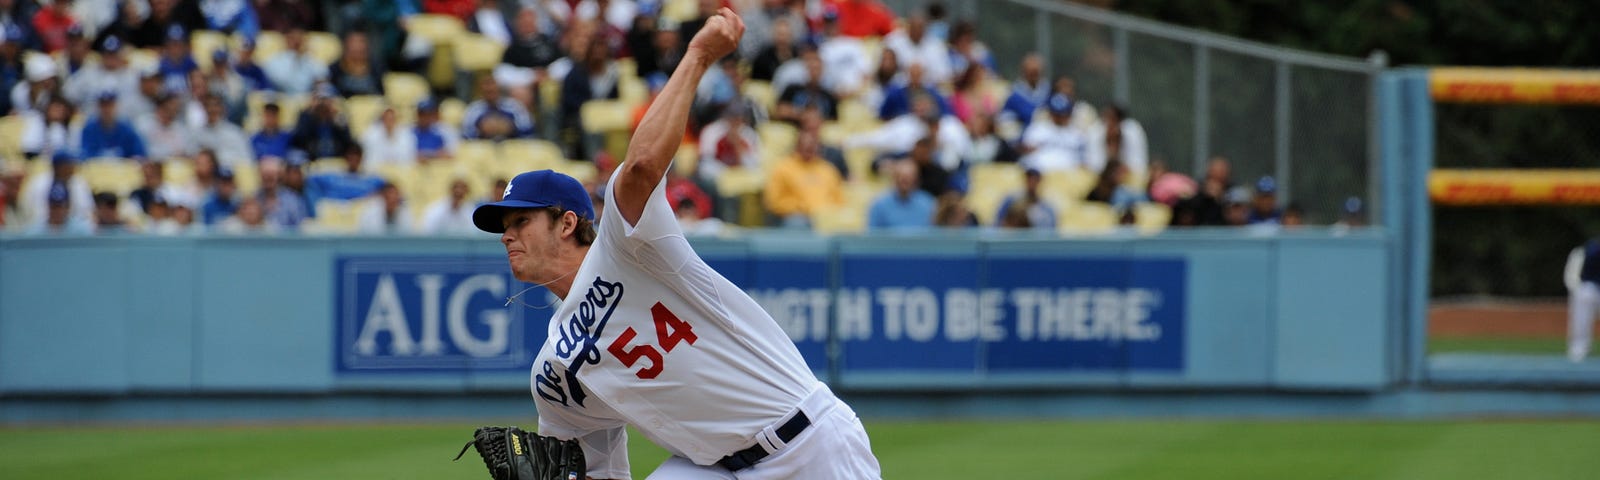 Welcome to the bigs: The story of Clayton Kershaw's MLB debut